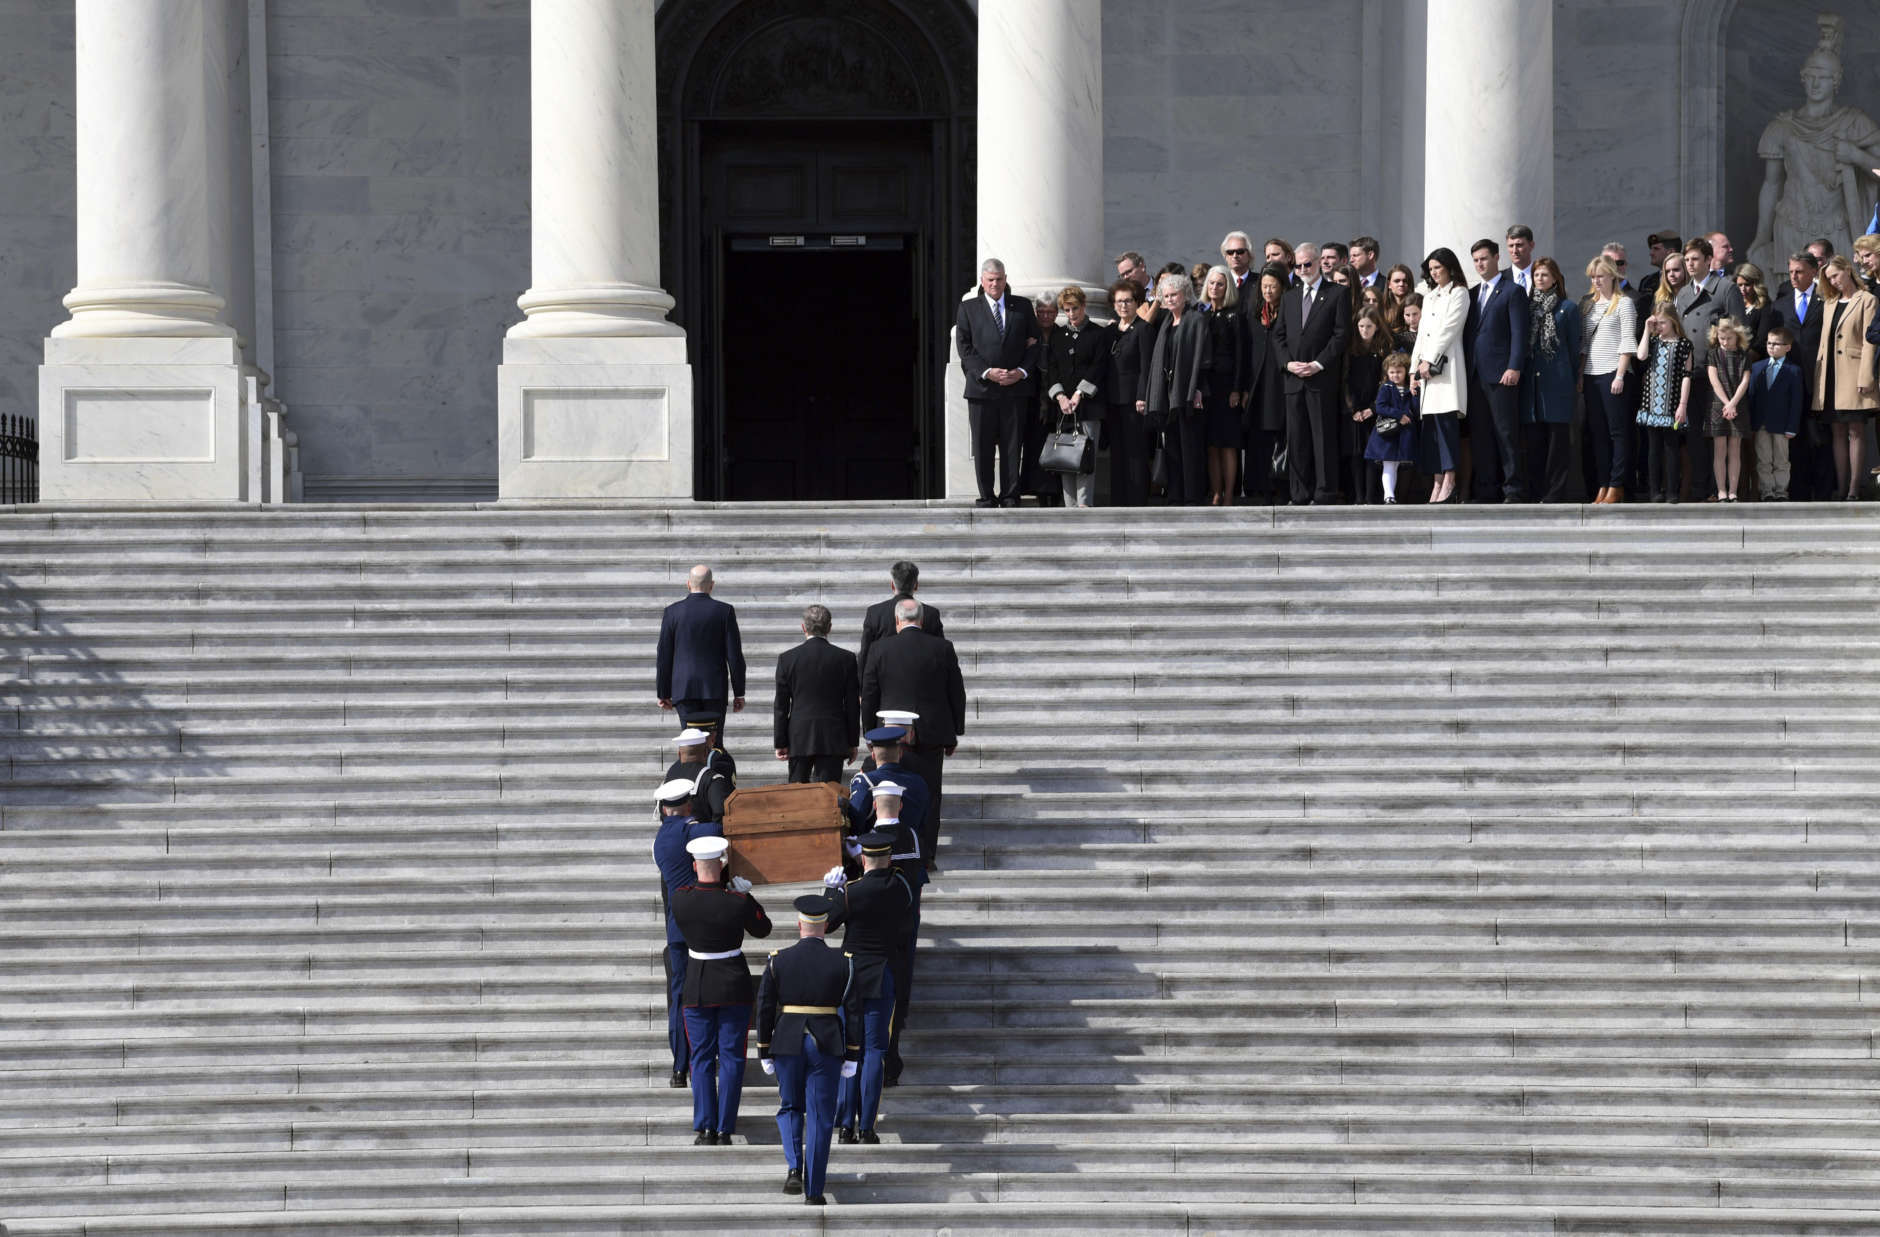 The family of Rev. Billy Graham watches as the casket of Rev. Billy Graham is carried up the steps of the U.S. Capitol in Washington, Wednesday, Feb. 28, 2018, where it will lie in honor in the Rotunda. It's a rare honor for a private citizen to lie in honor at the Capitol. Graham died Wednesday in his sleep at his North Carolina home. He was 99. (AP Photo/Susan Walsh, Pool)